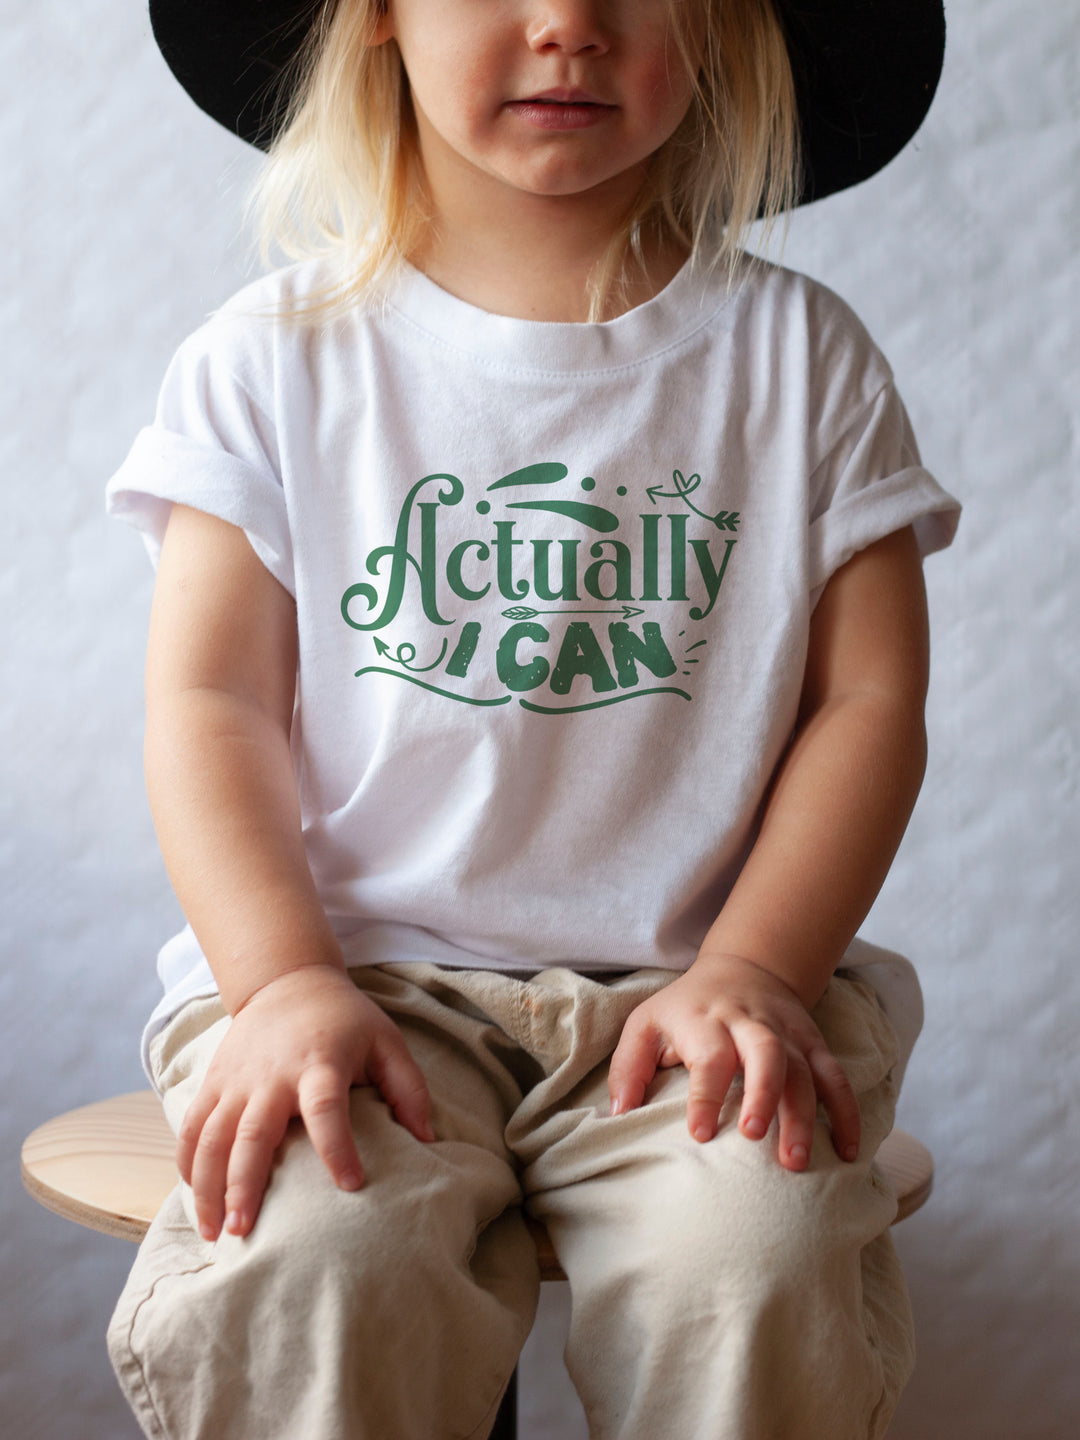 Actually I Can Amazon Green. Short Sleeve T Shirt For Toddler And Kids. - TeesForToddlersandKids -  t-shirt - positive - actually-i-can-amazon-green-short-sleeve-t-shirt-for-toddler-and-kids